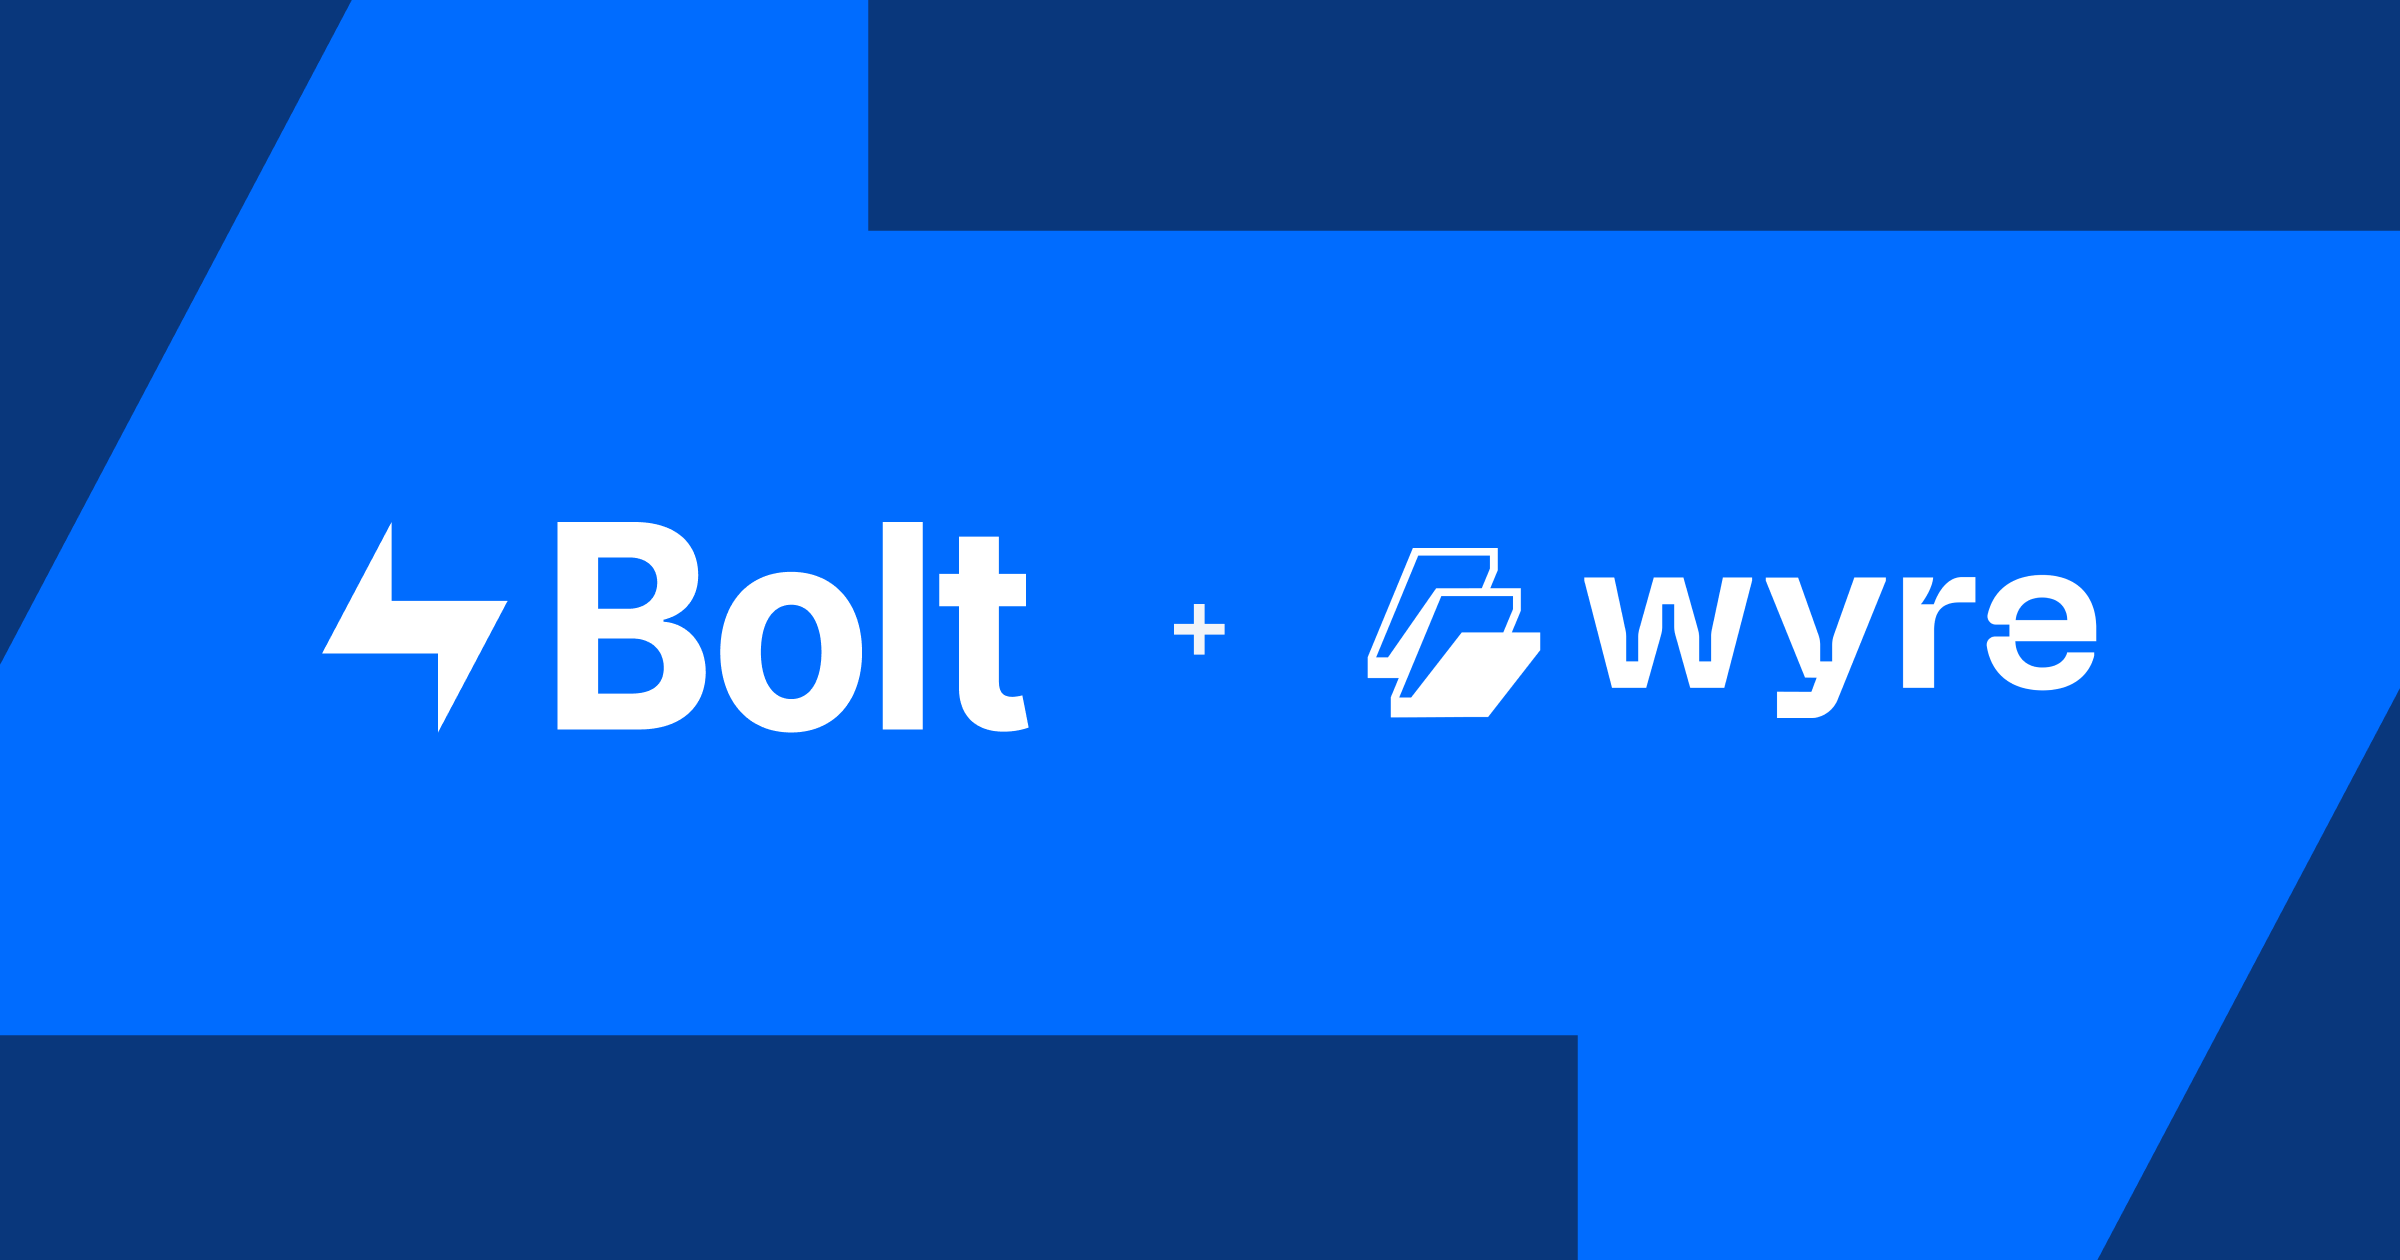 "Unicorn" Bolt spends $ 1.5 billion on the Wyre platform, the largest acquisition in the cryptocurrency industry